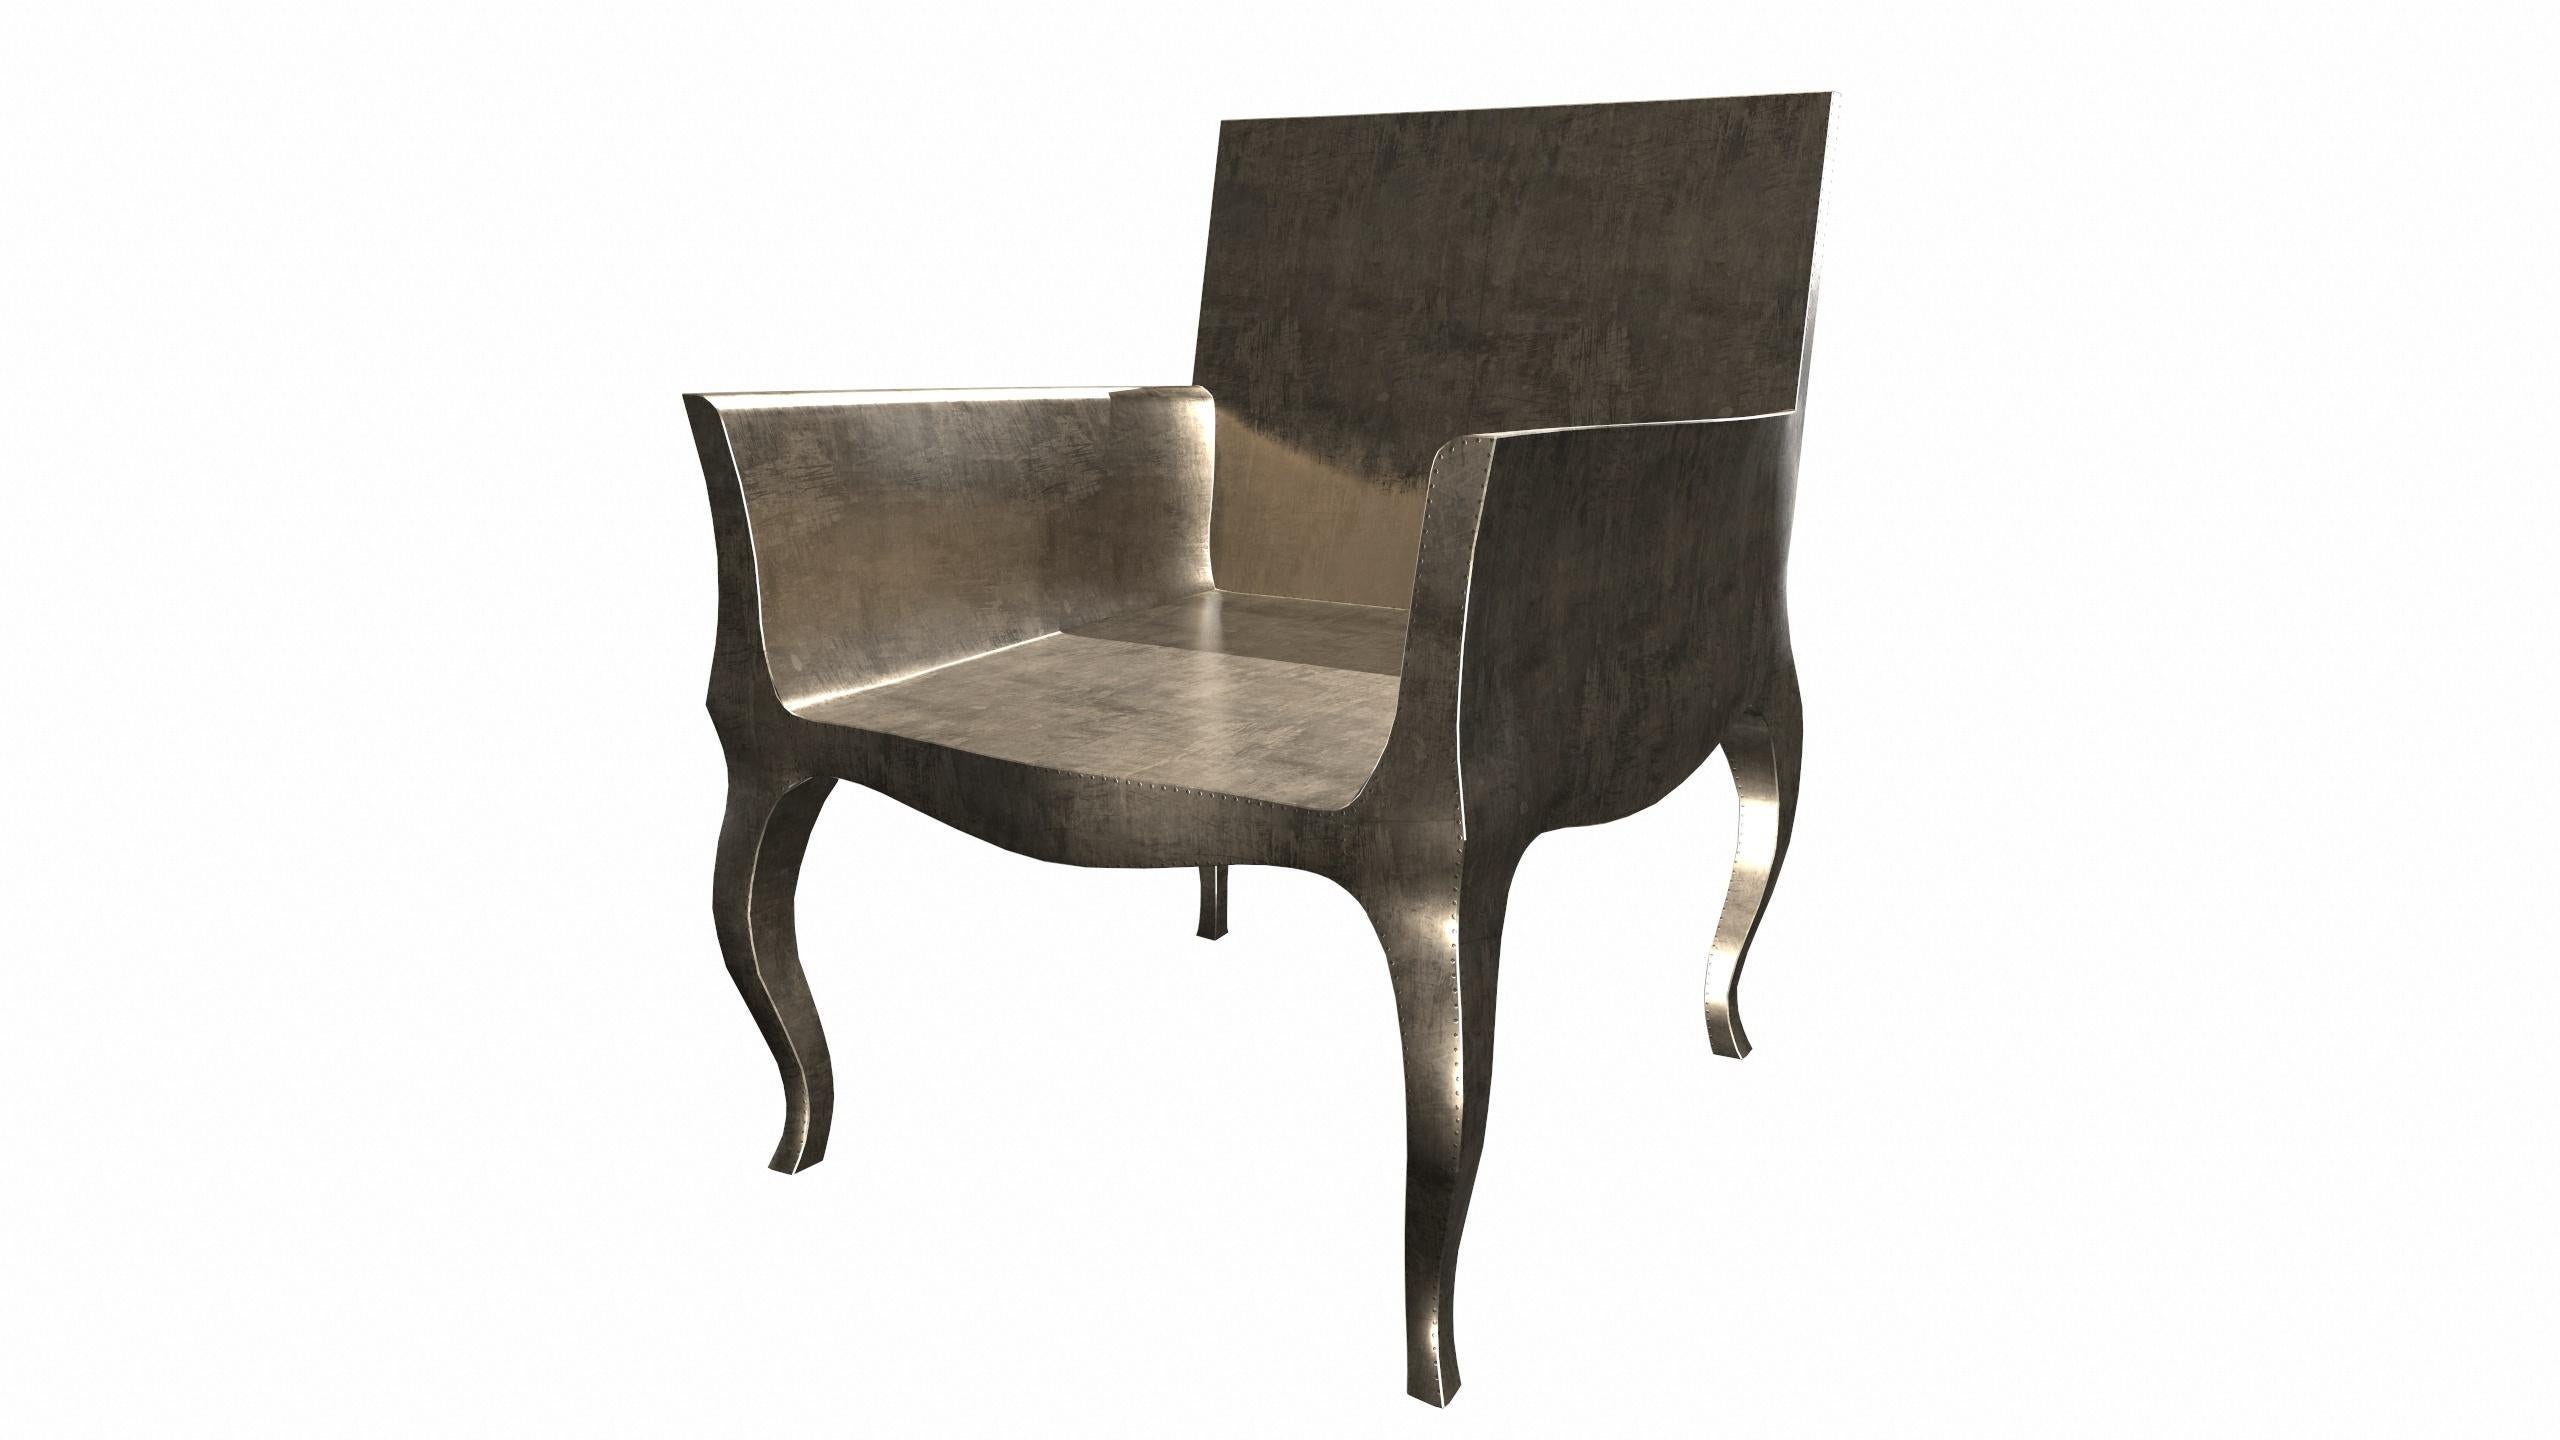 Other Art Nouveau Chairs in Smooth Antique Bronze by Paul Mathieu for S. Odegard For Sale